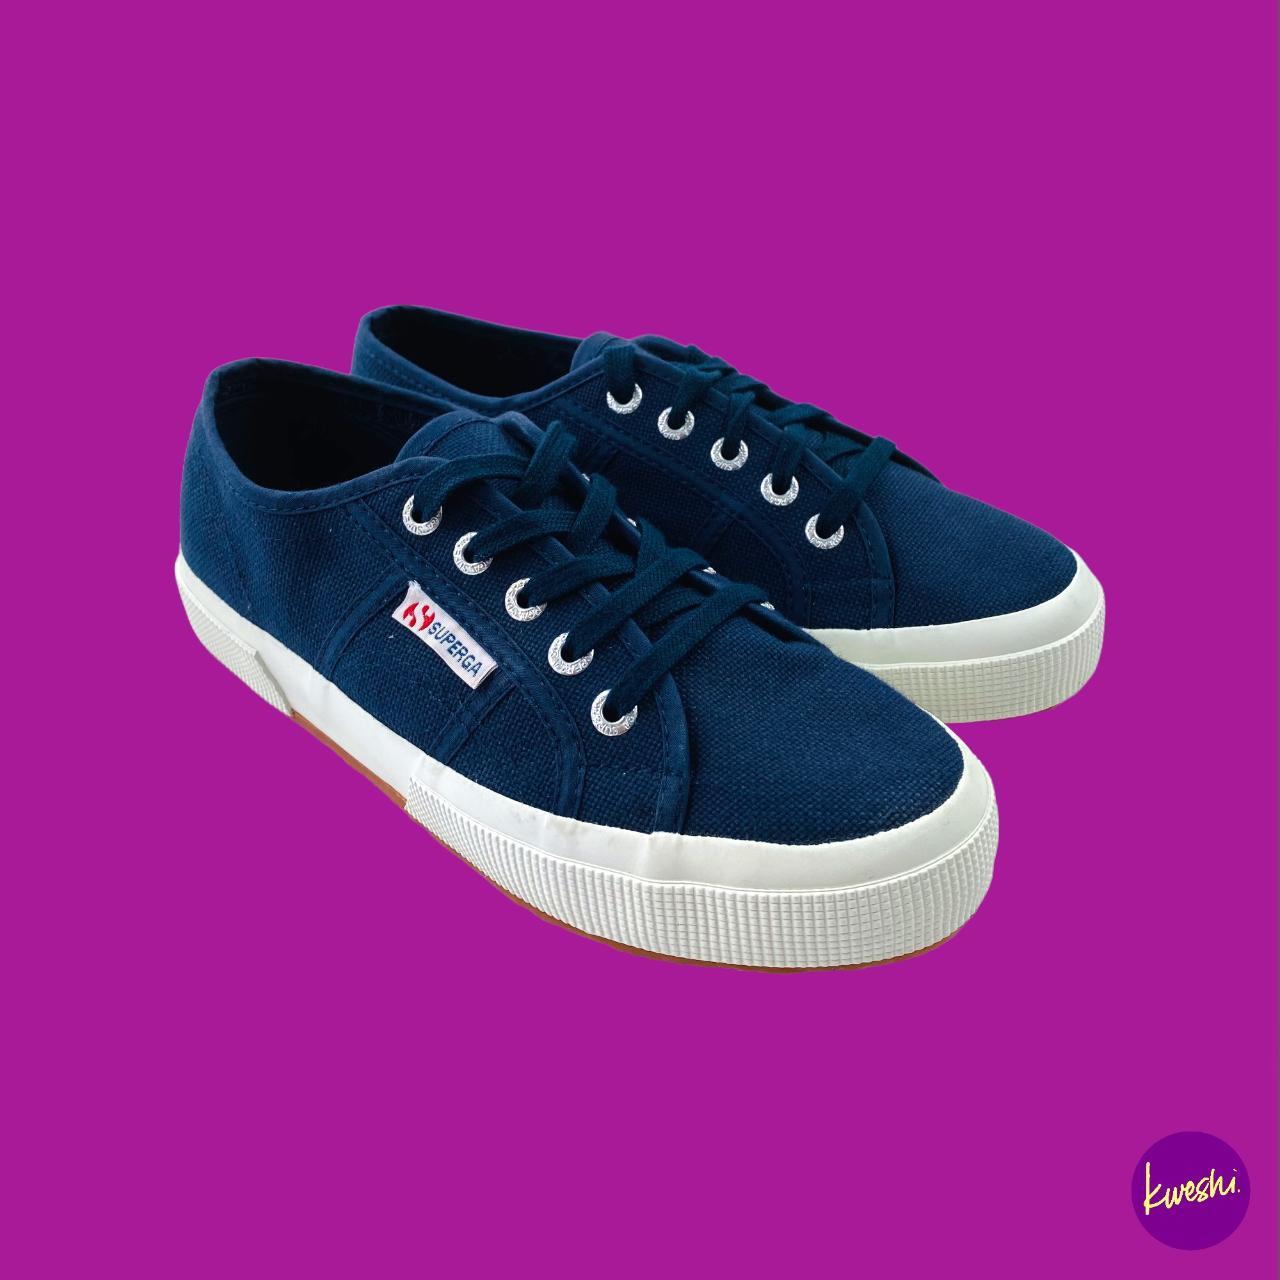 Superga Women's Navy and White Trainers | Depop